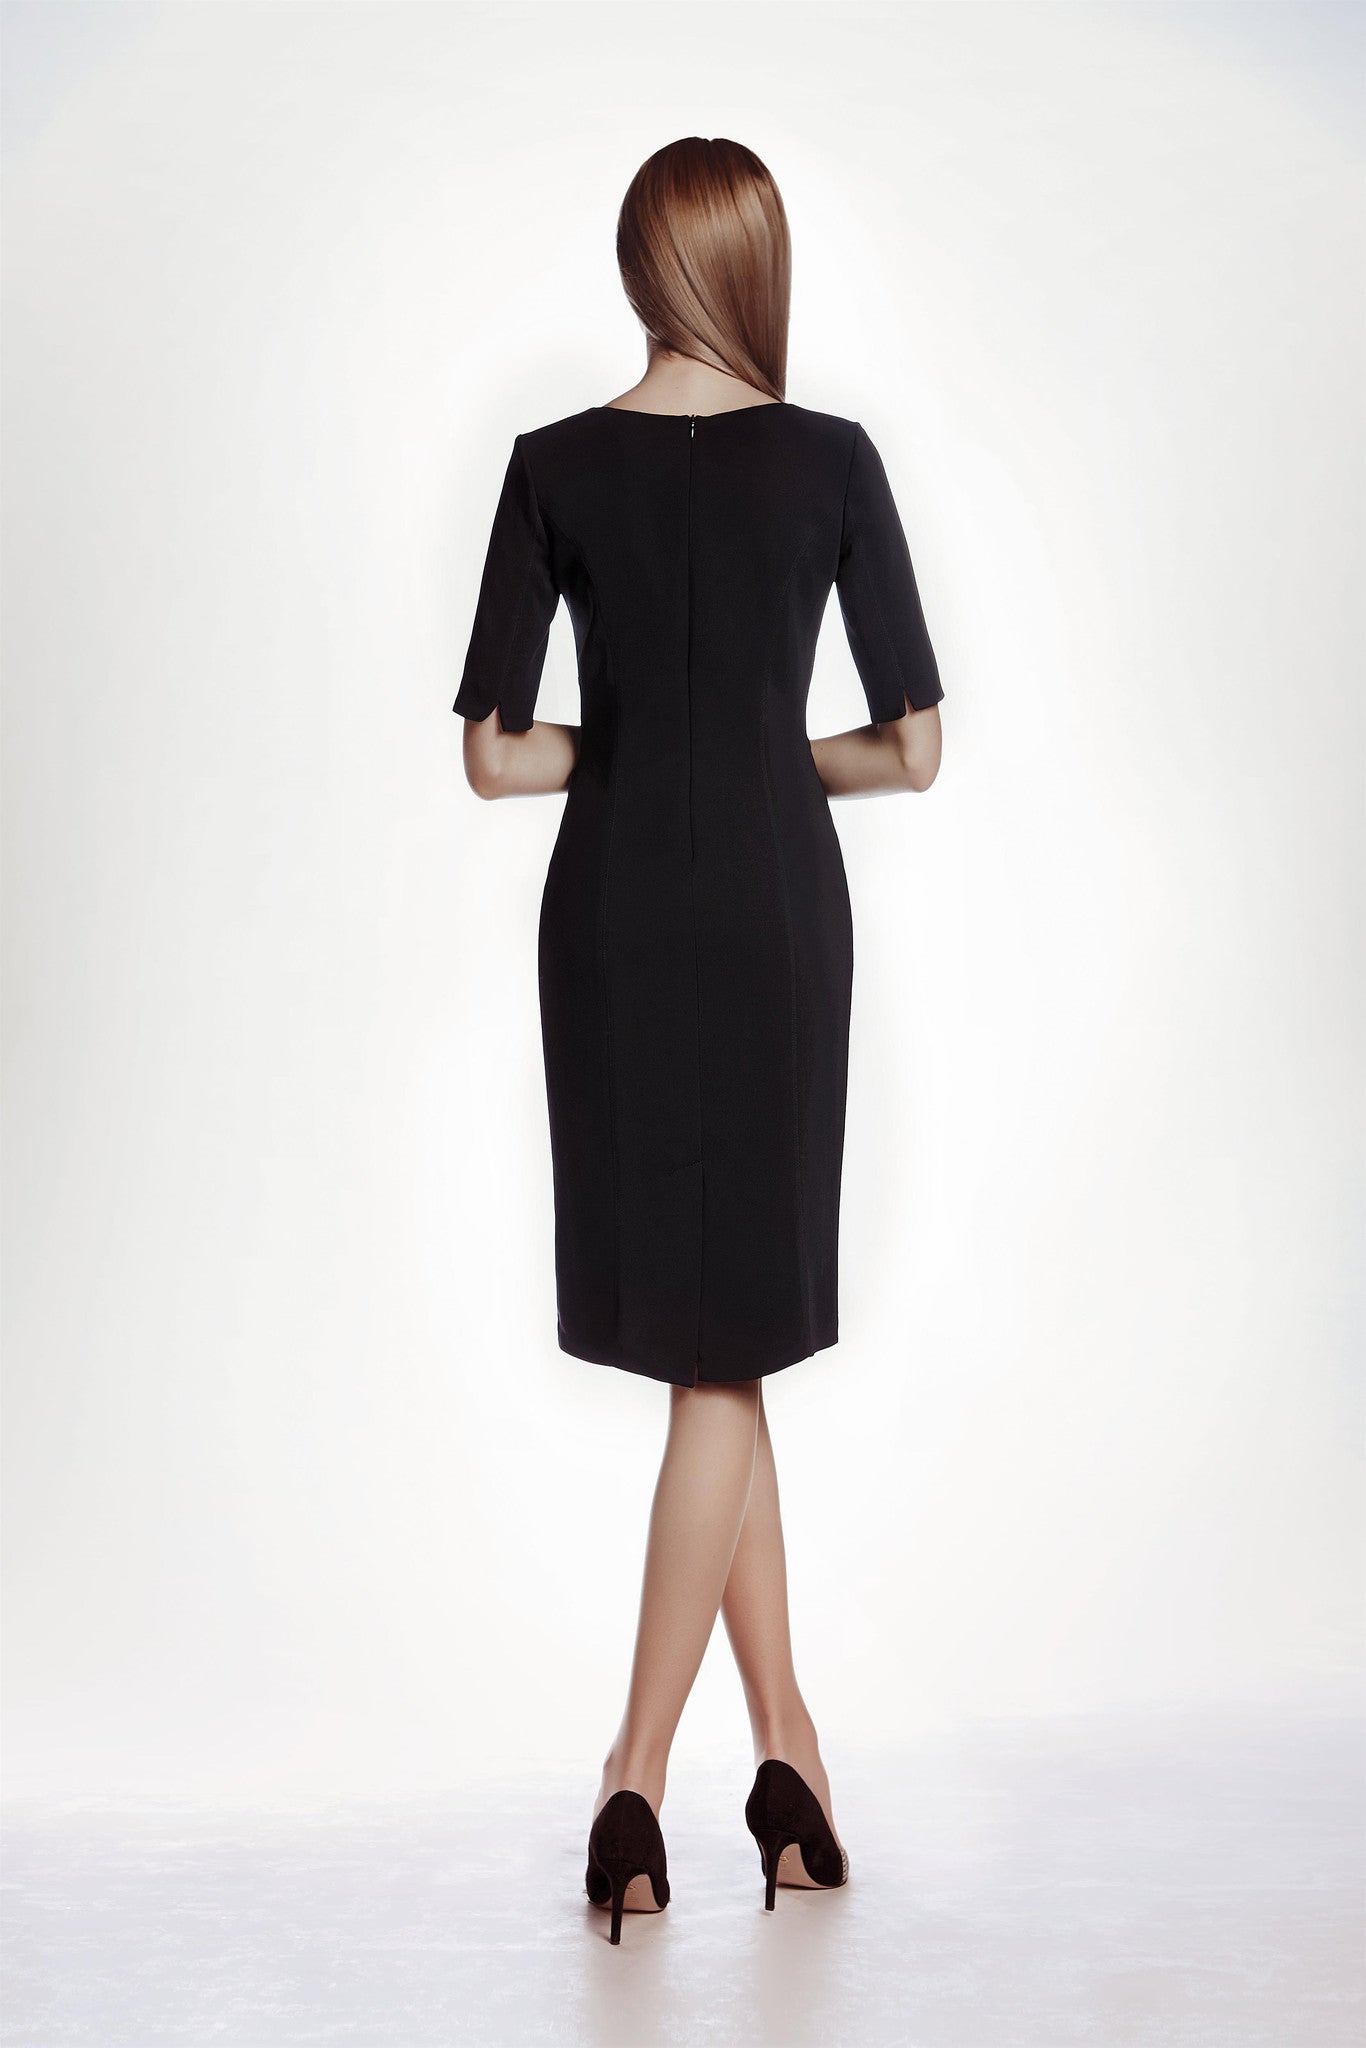 Black Fitted Knee Length Dress with Asymmetrical Neckline